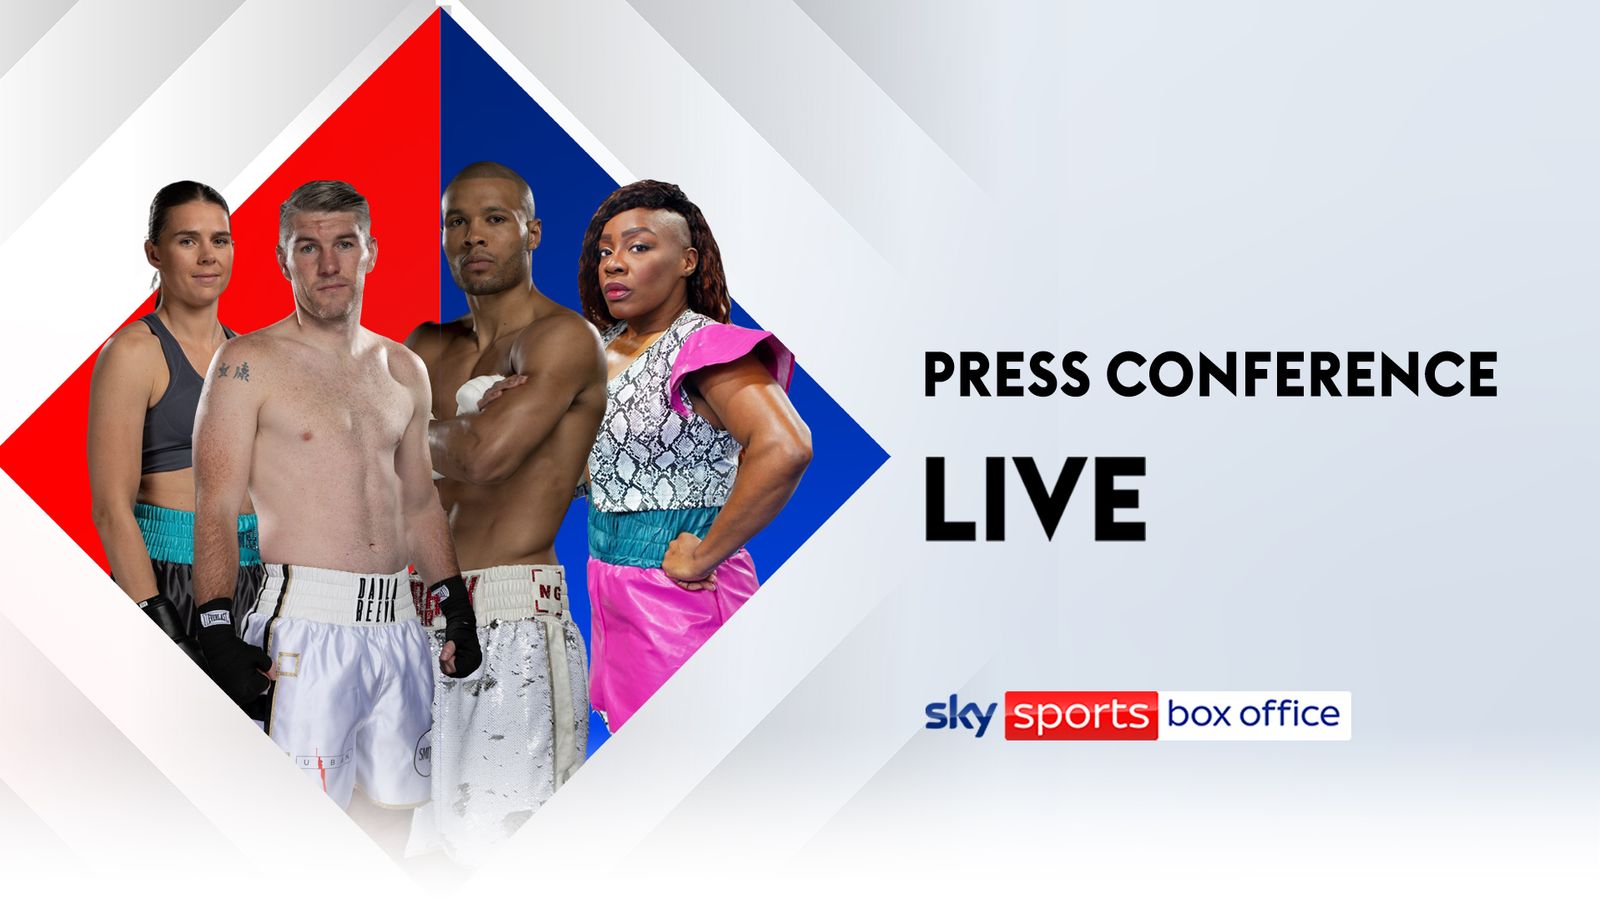 Liam Smith vs Chris Eubank Jr II and Franchon Crews-Dezurn vs Savannah Marshall Watch a live stream of the press conference Boxing News Sky Sports